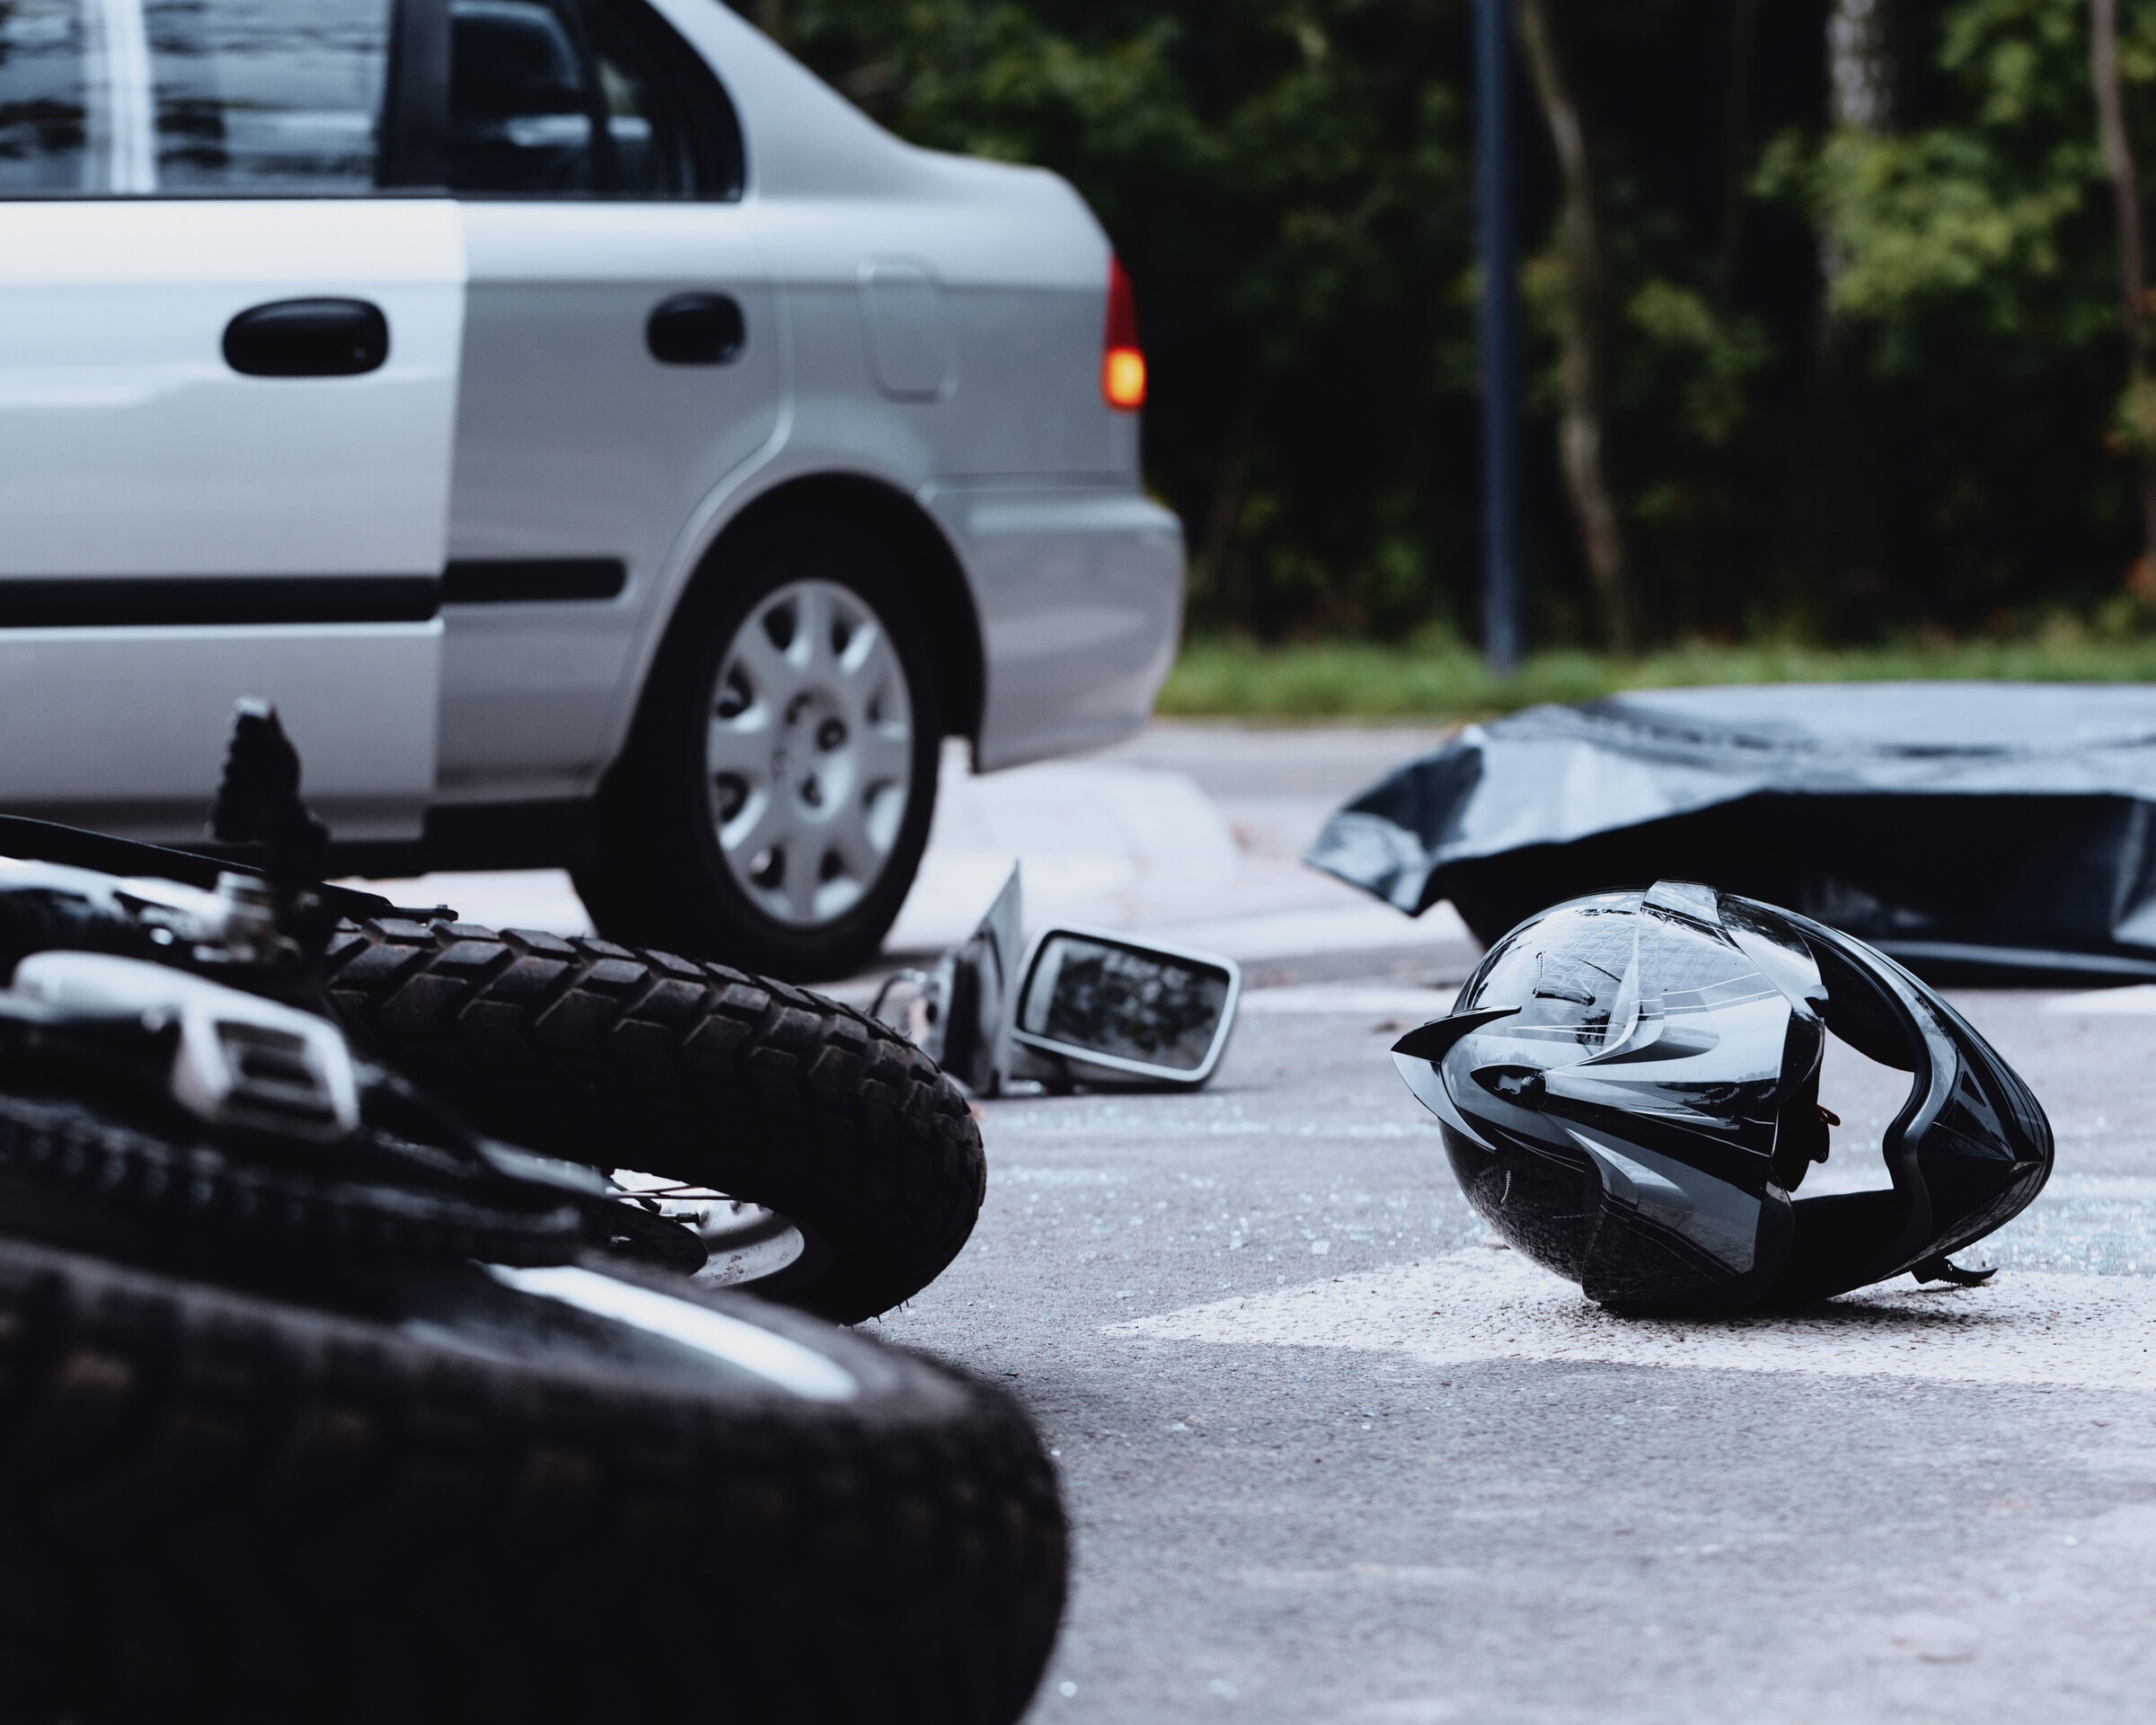 Reliable lawyers who are dedicated to providing support and guidance to those affected by car and motor vehicle accidents in Alpharetta